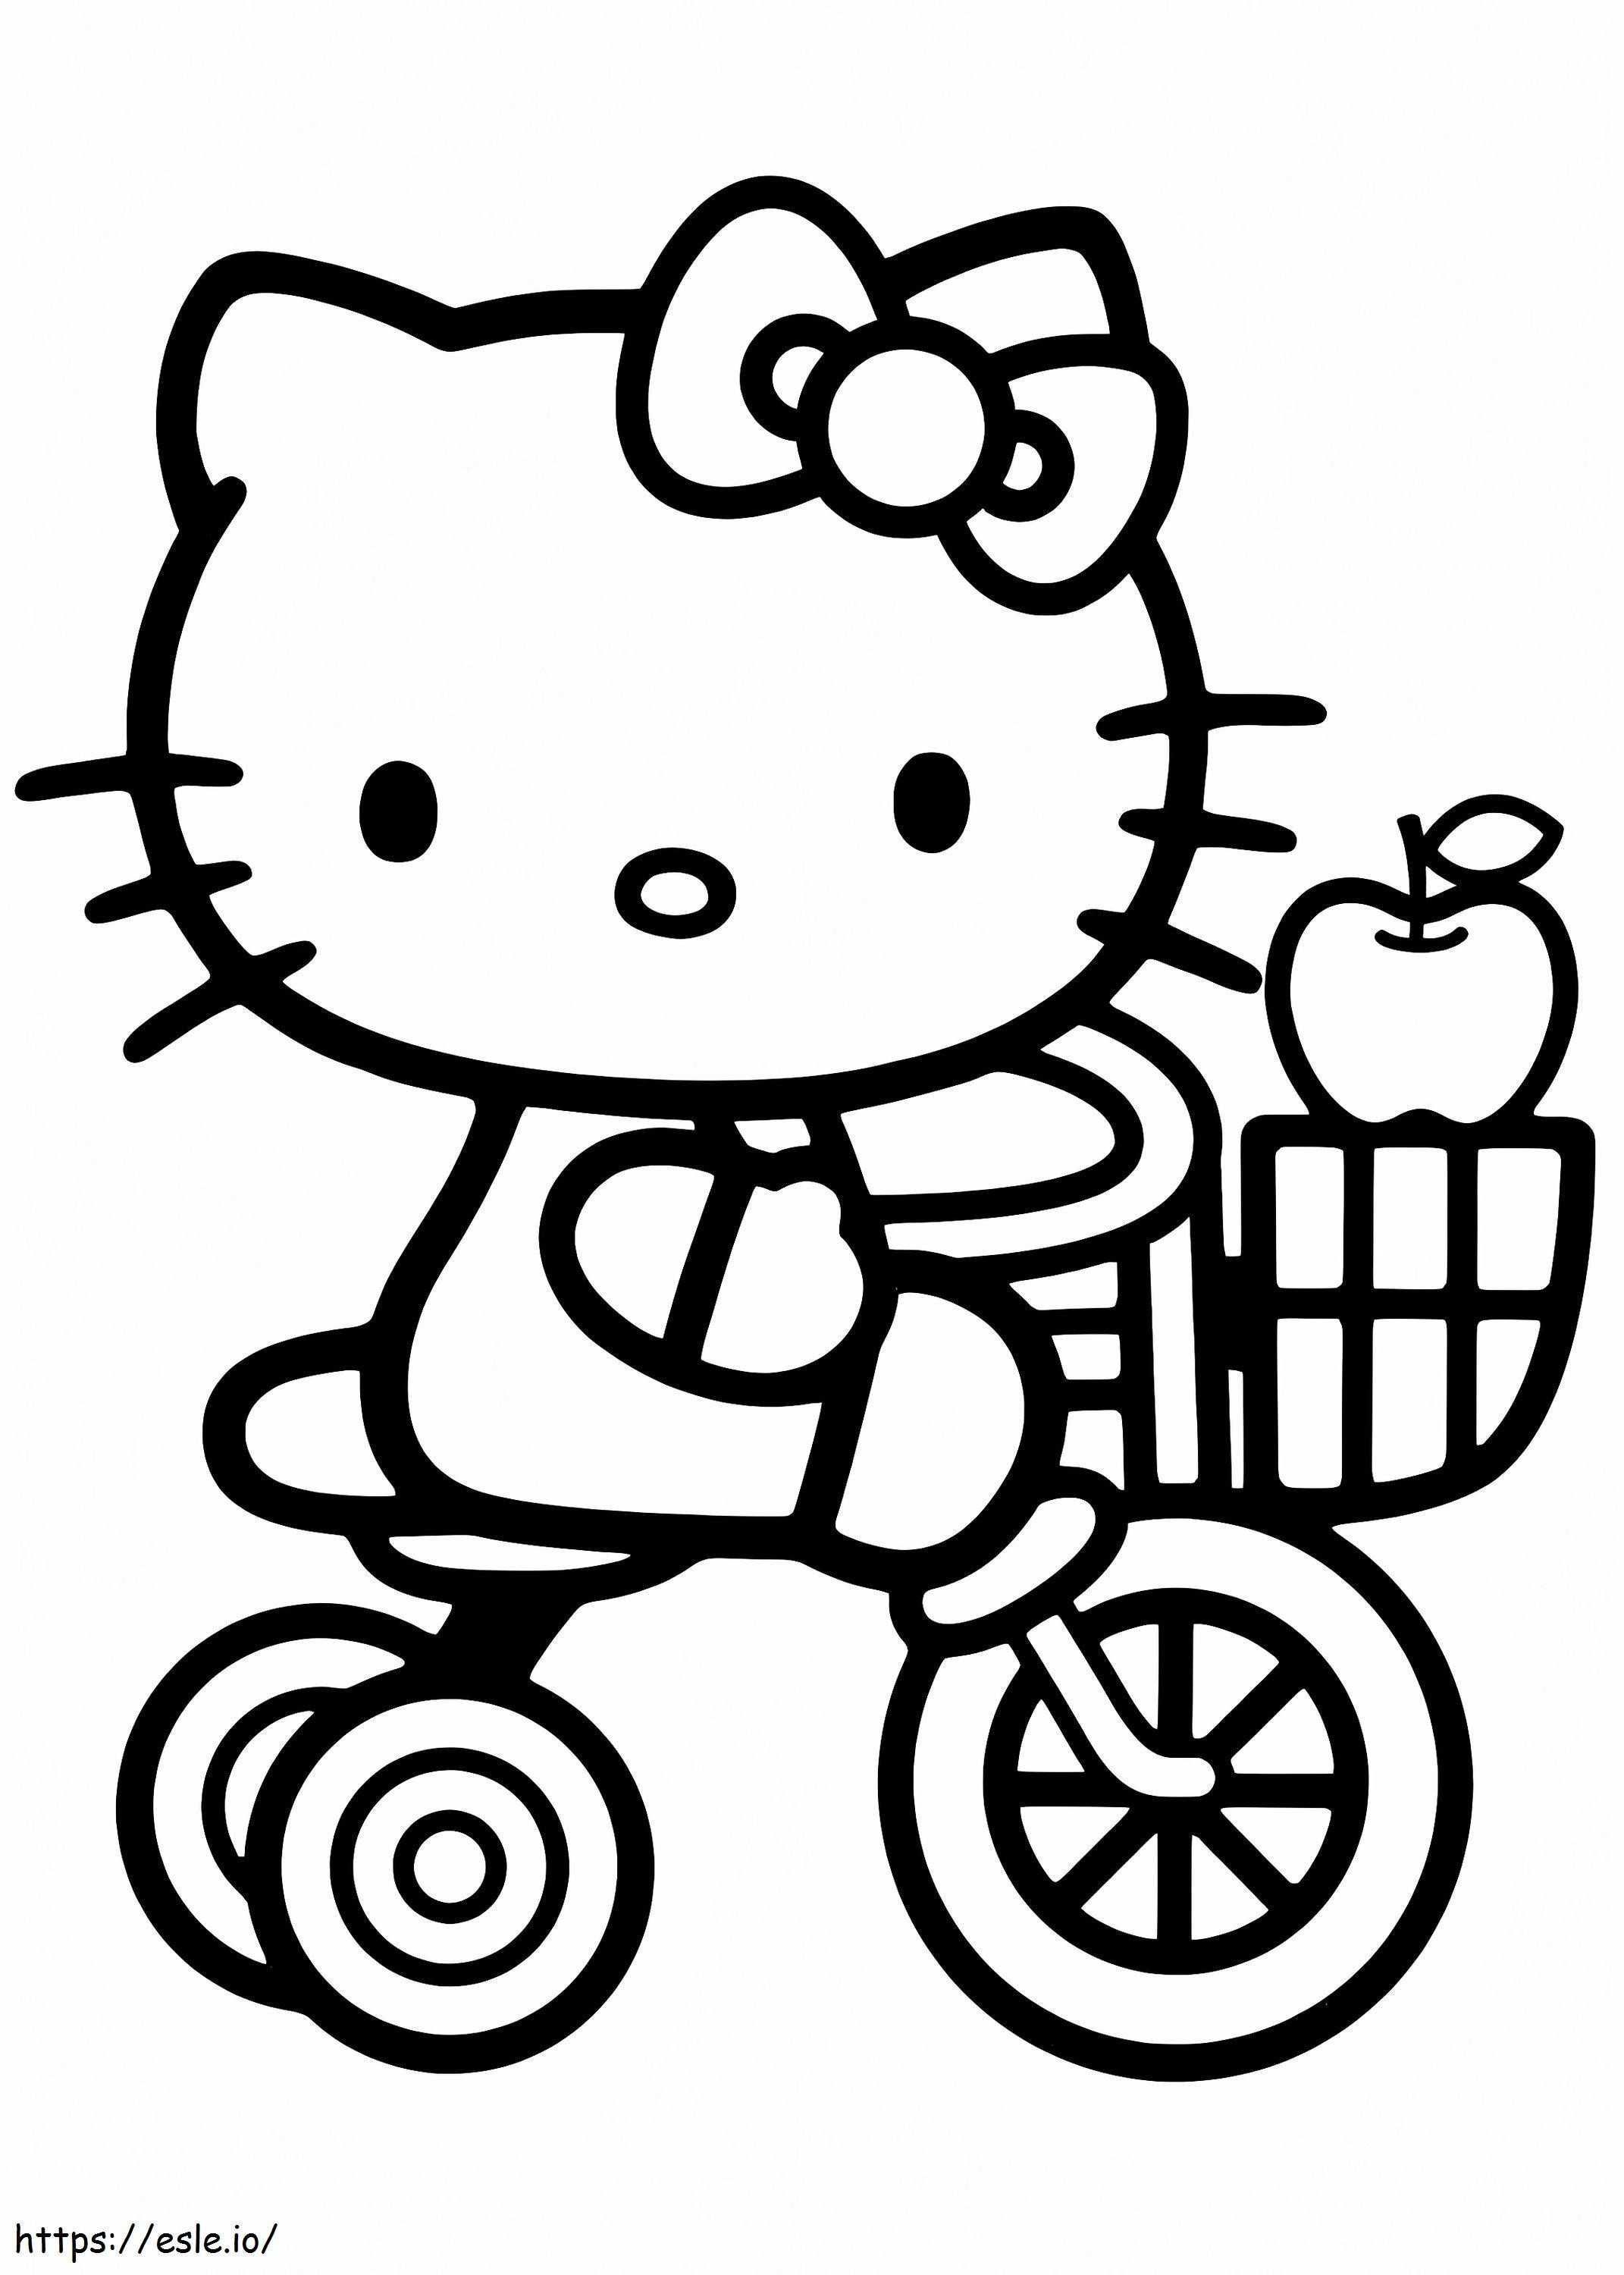 Hello Kitty Sur Tricycle coloring page